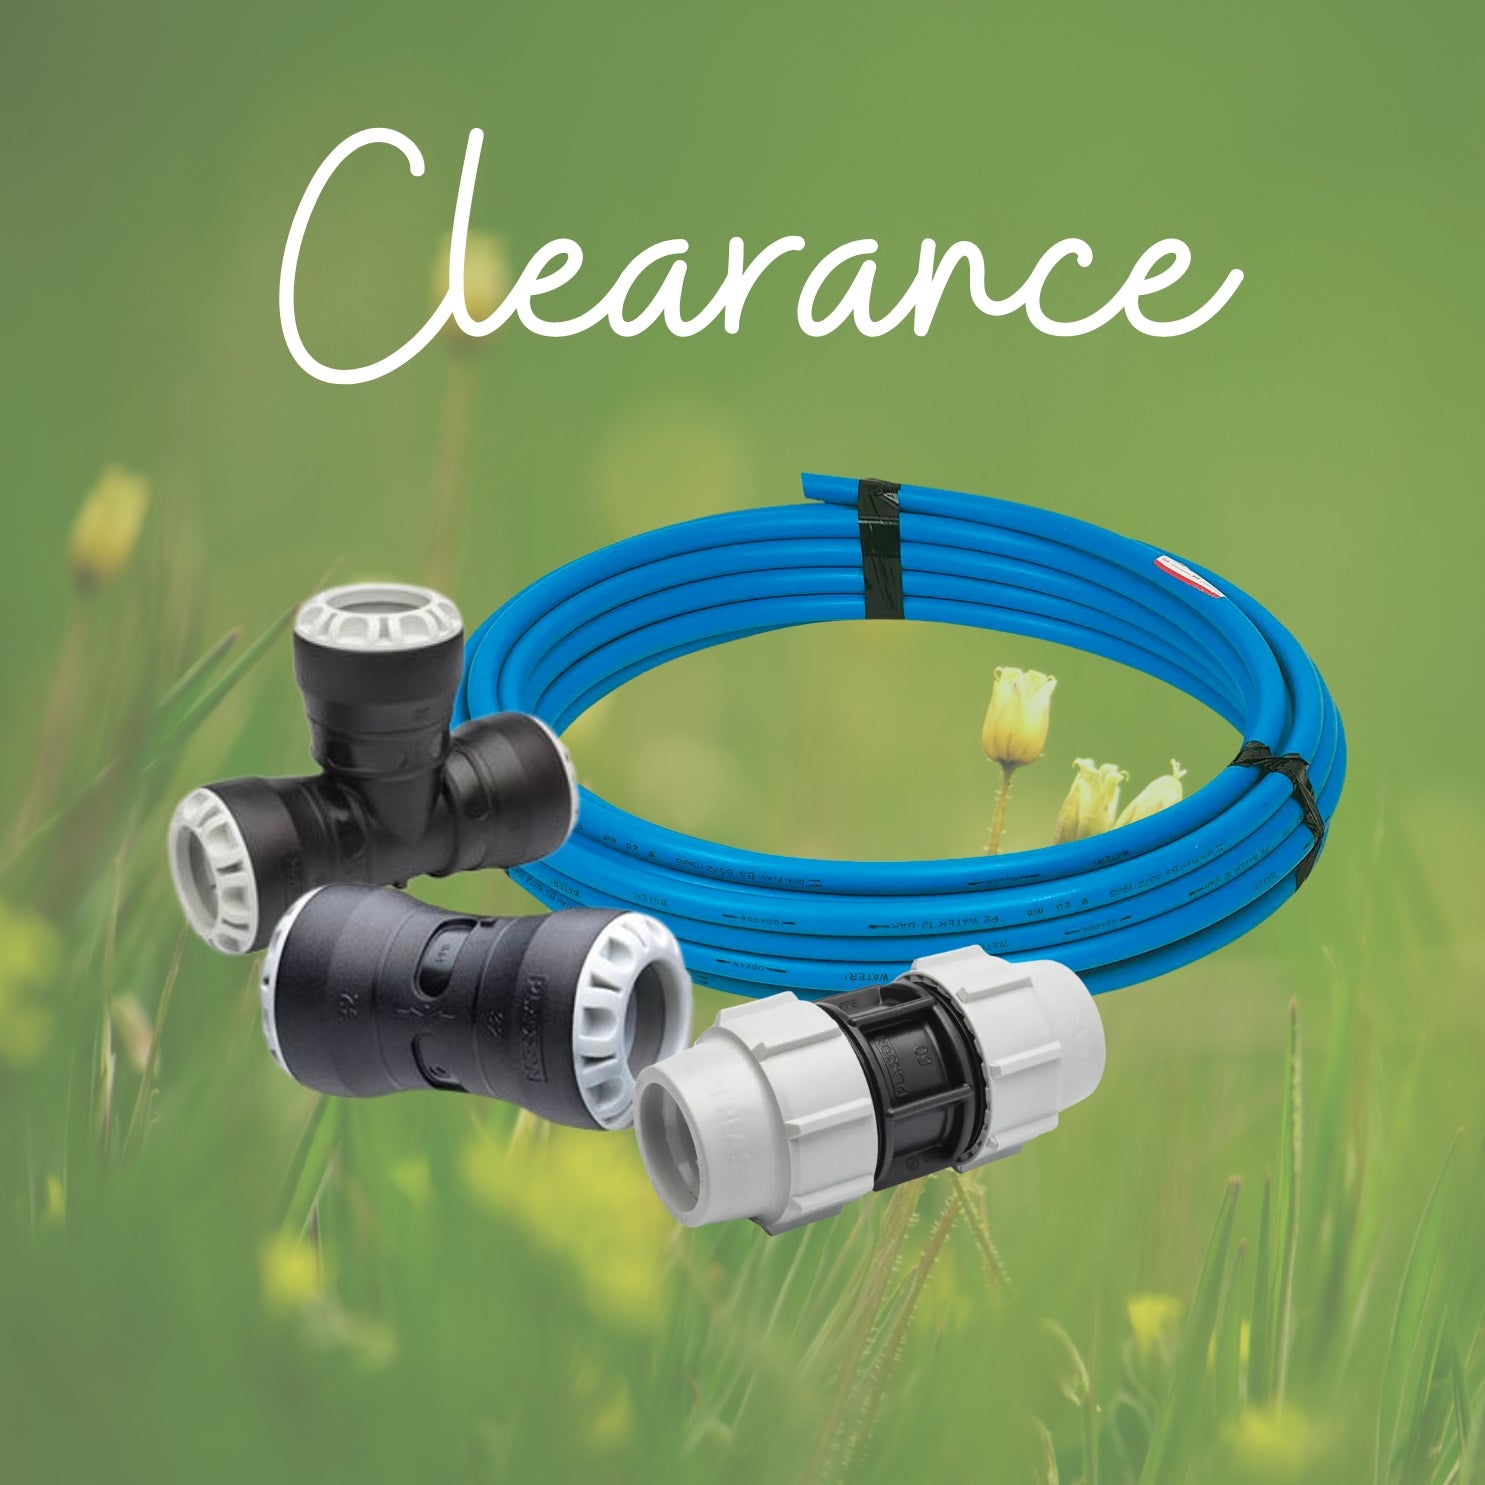 Clearance - Plumbing Fittings & Water Pipe